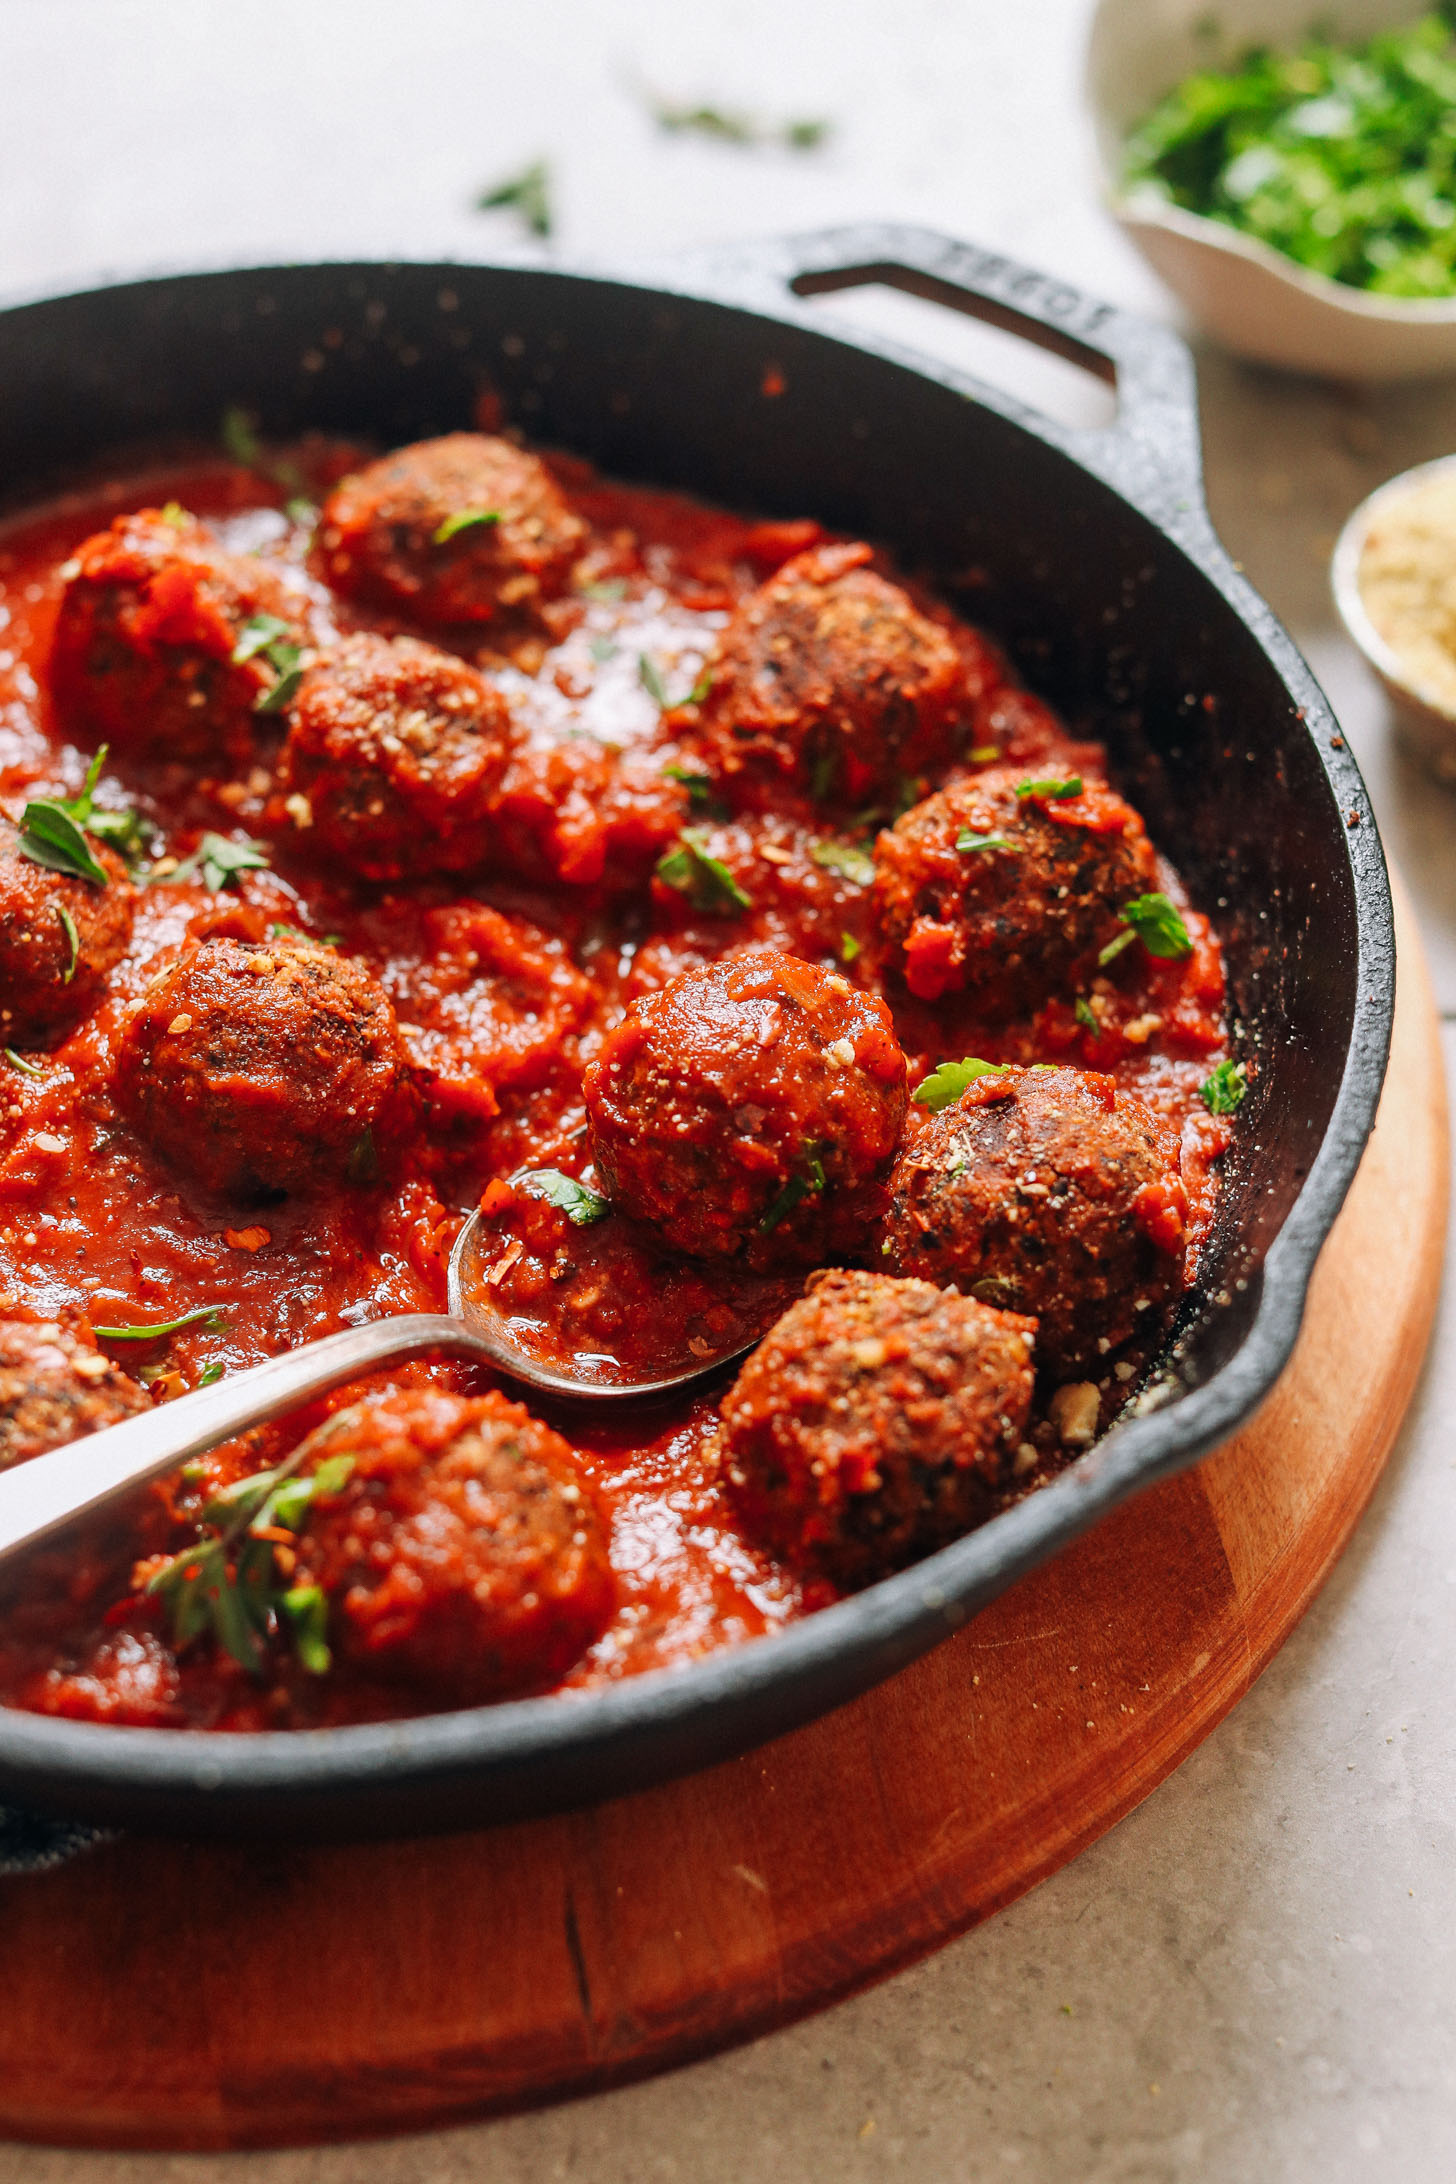 Cast-iron skillet filled with a batch of our delicious vegan meatball recipe